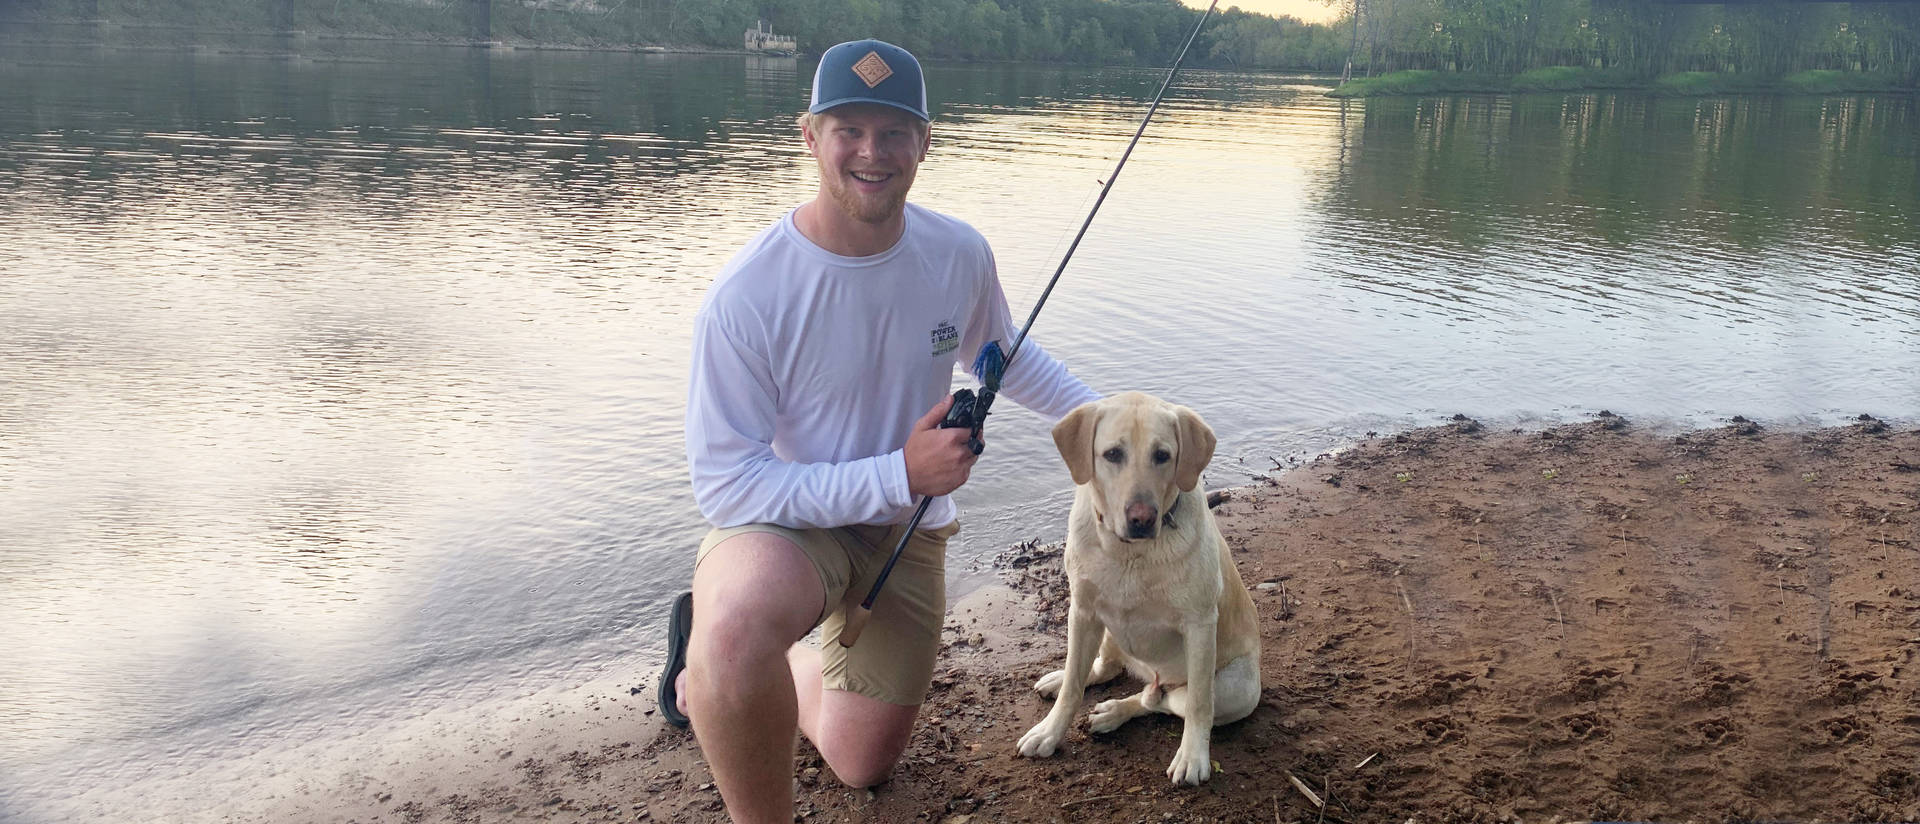 Joe Swanson has turned his passion for fishing into a thriving small business, Gold Standard Outdoors. He builds and sells custom fishing rods, something he learned to do when he was a boy.